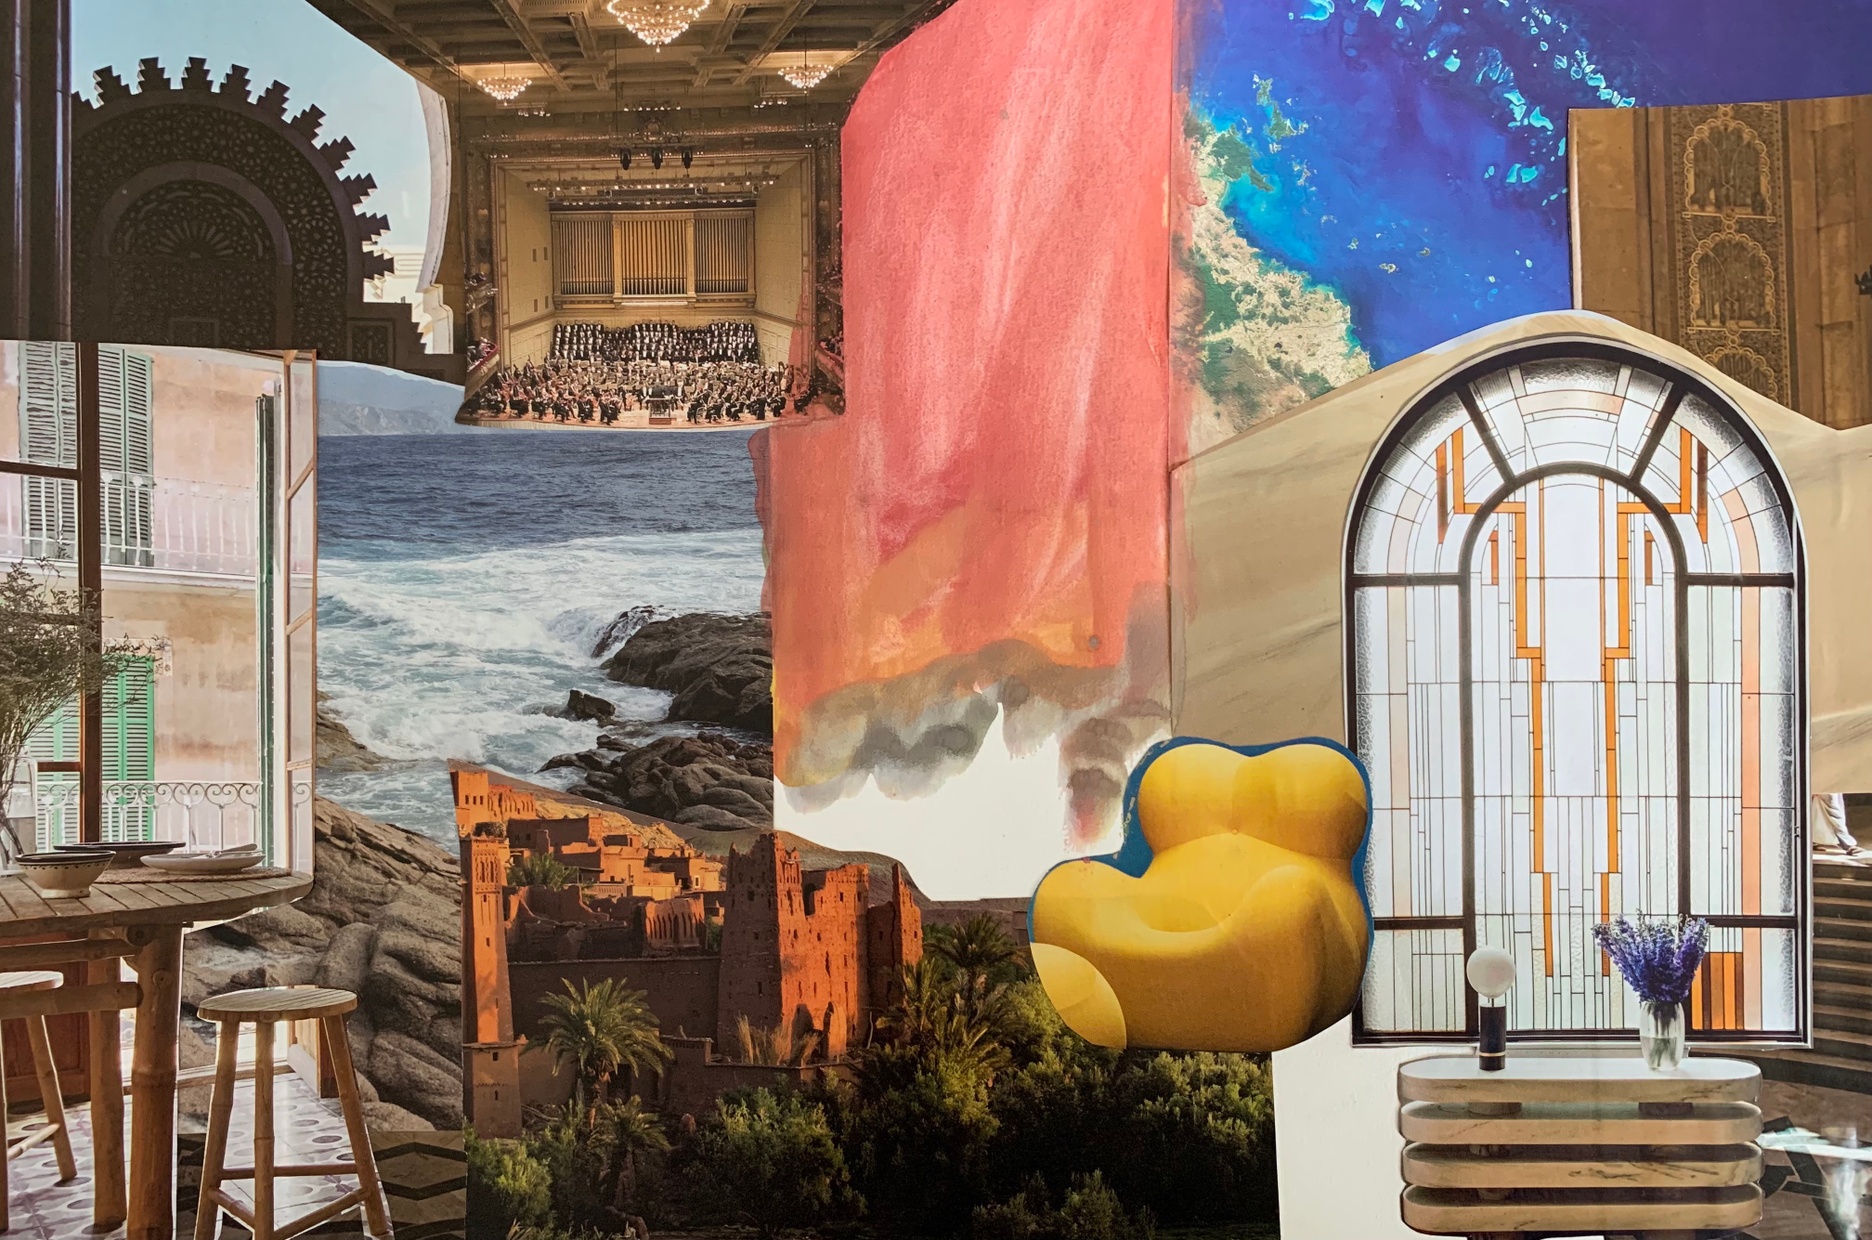 A collage including images of an arch window, yellow form, ocean, castle, performance theater, aerial view of the ocean, gear-like round architecture, and a section of pinkish red watercolor wash. 